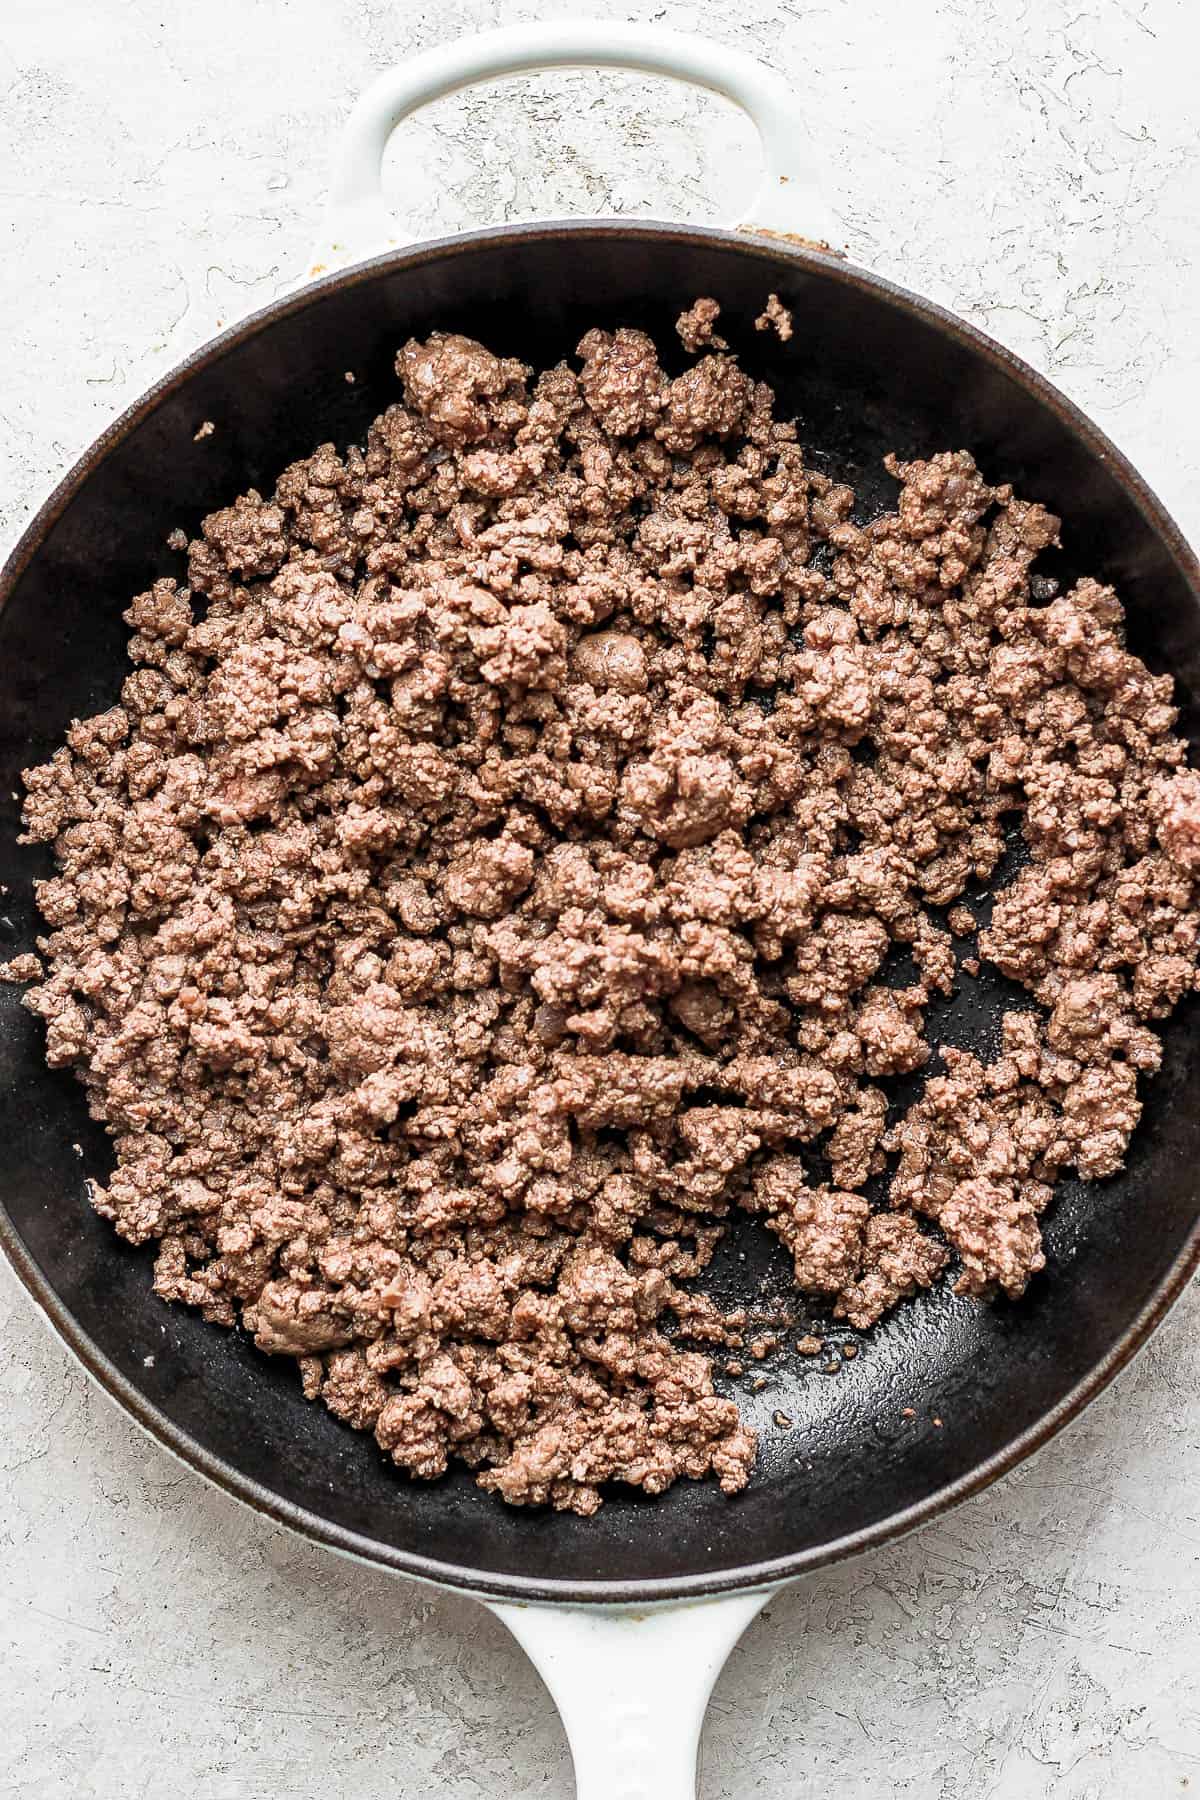 Crumbled and cooked ground beef in a cast iron skillet.